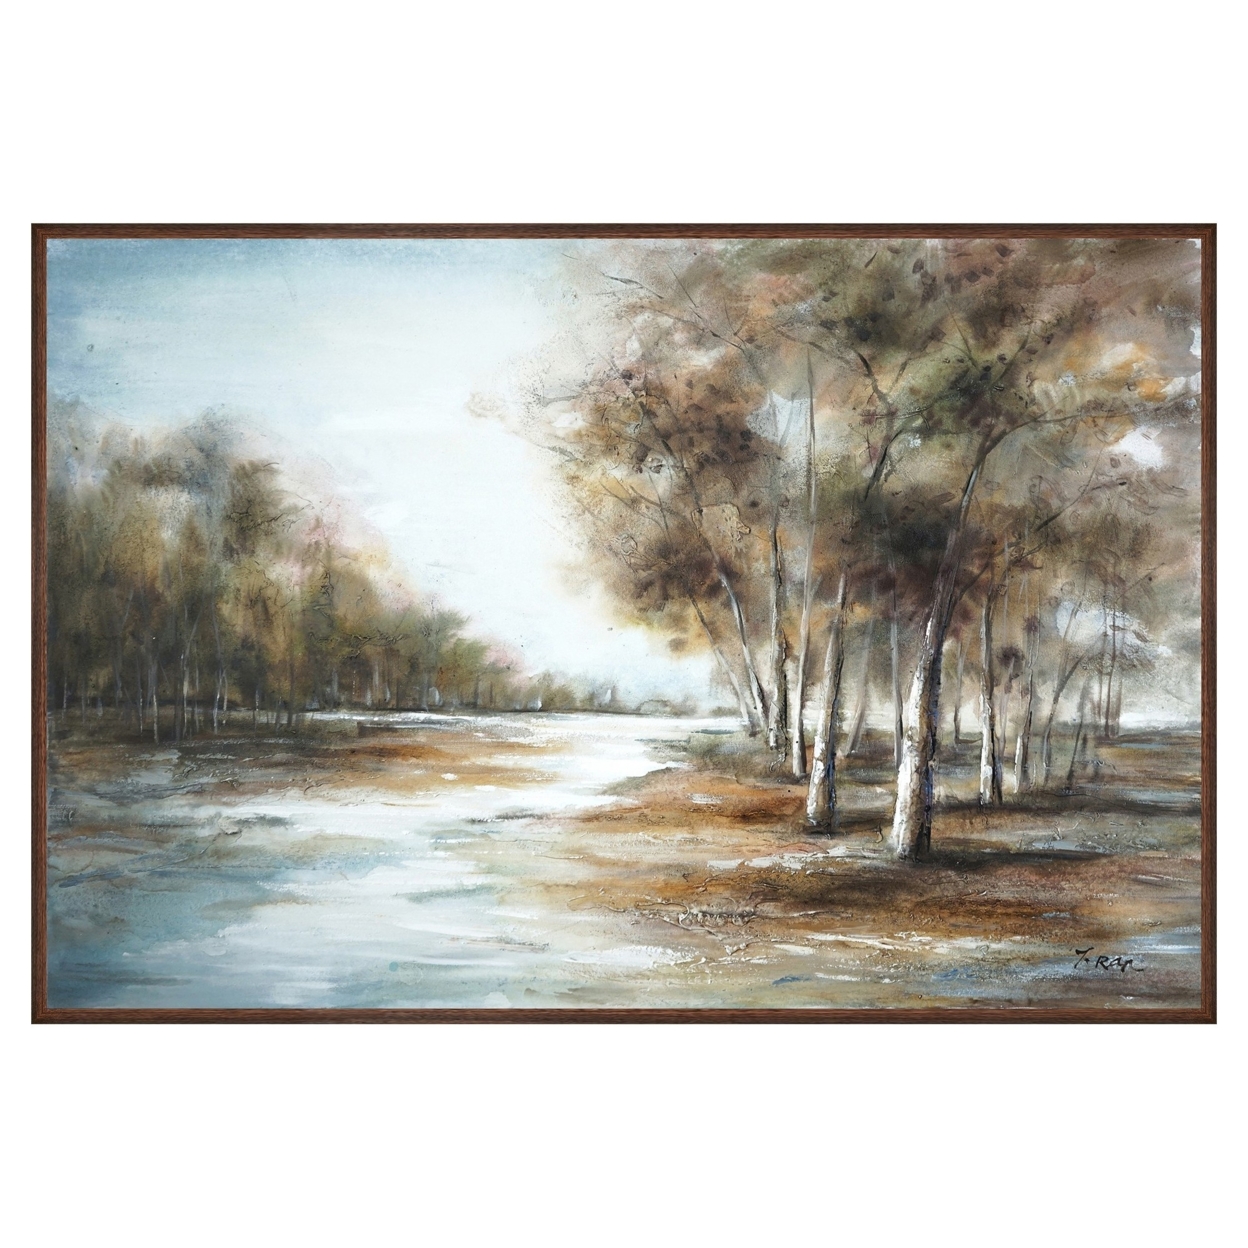 39 X 59 Hand Painted Forest Scenery, Resin Coat, Warm Blues And Browns- Saltoro Sherpi